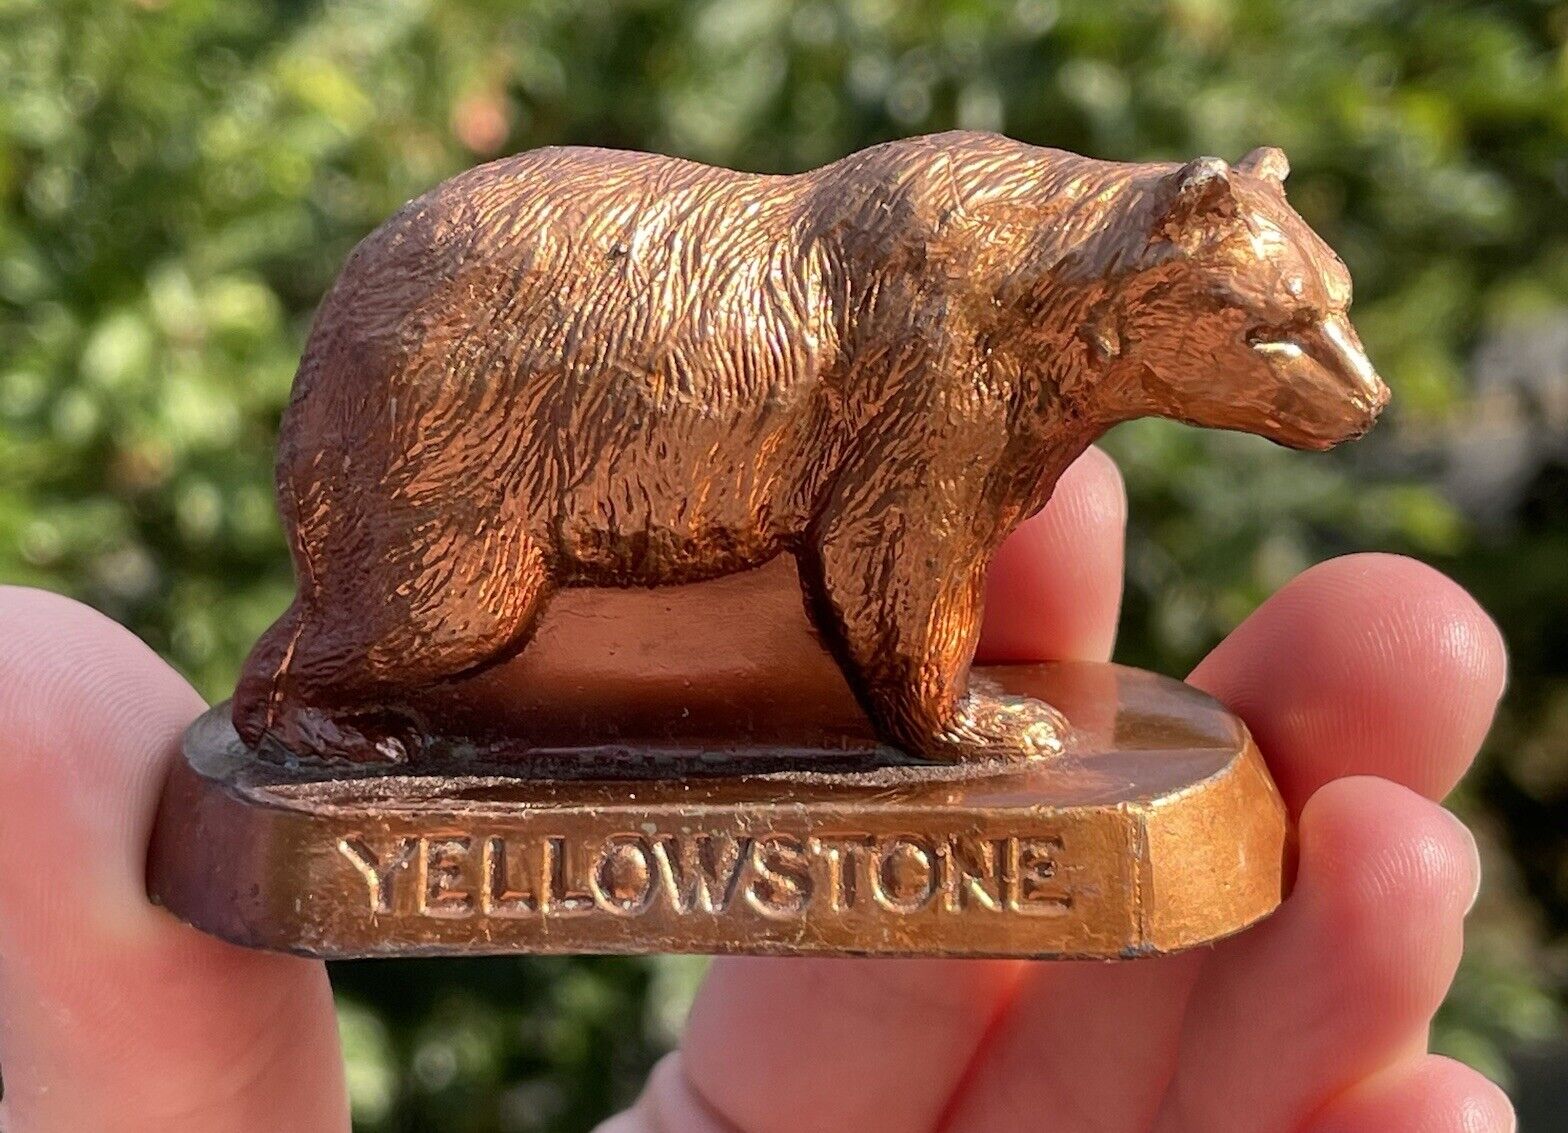 RARE VINTAGE YELLOWSTONE PARK BEAR COPPER COATED METAL USA SOUVENIR PAPERWEIGHT